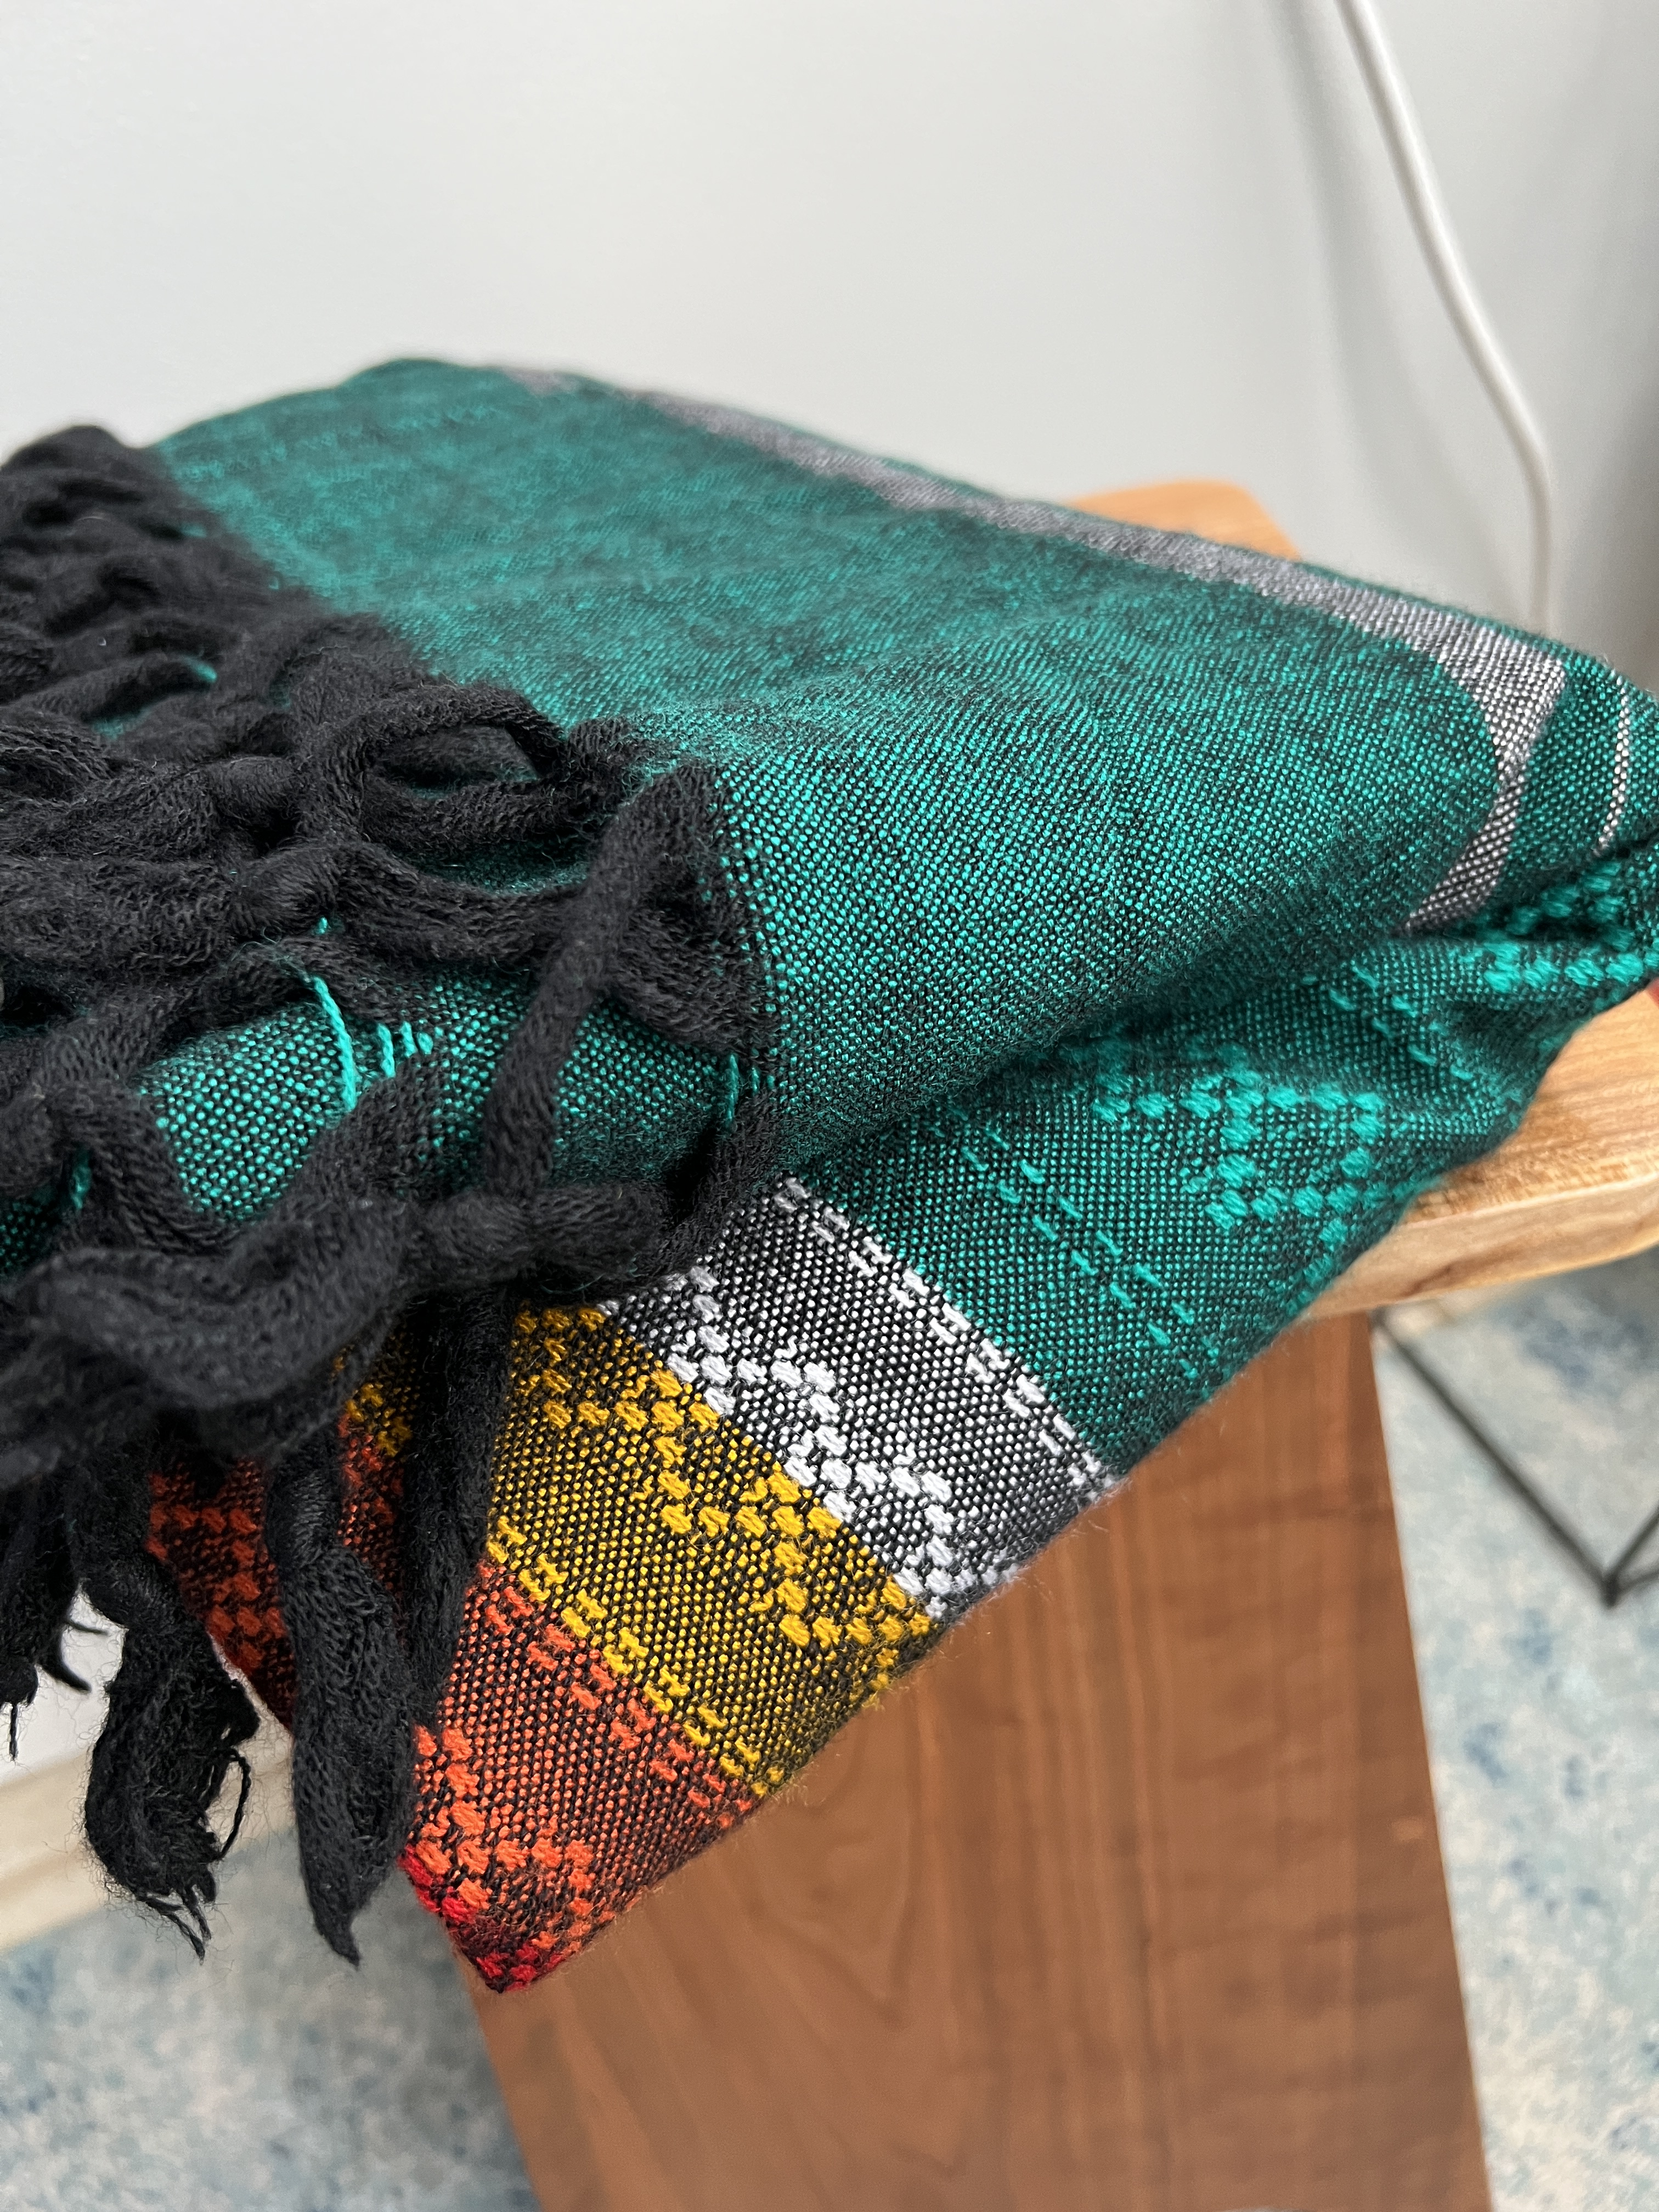 Multicolored, predominately green blanket made from Agave fibers